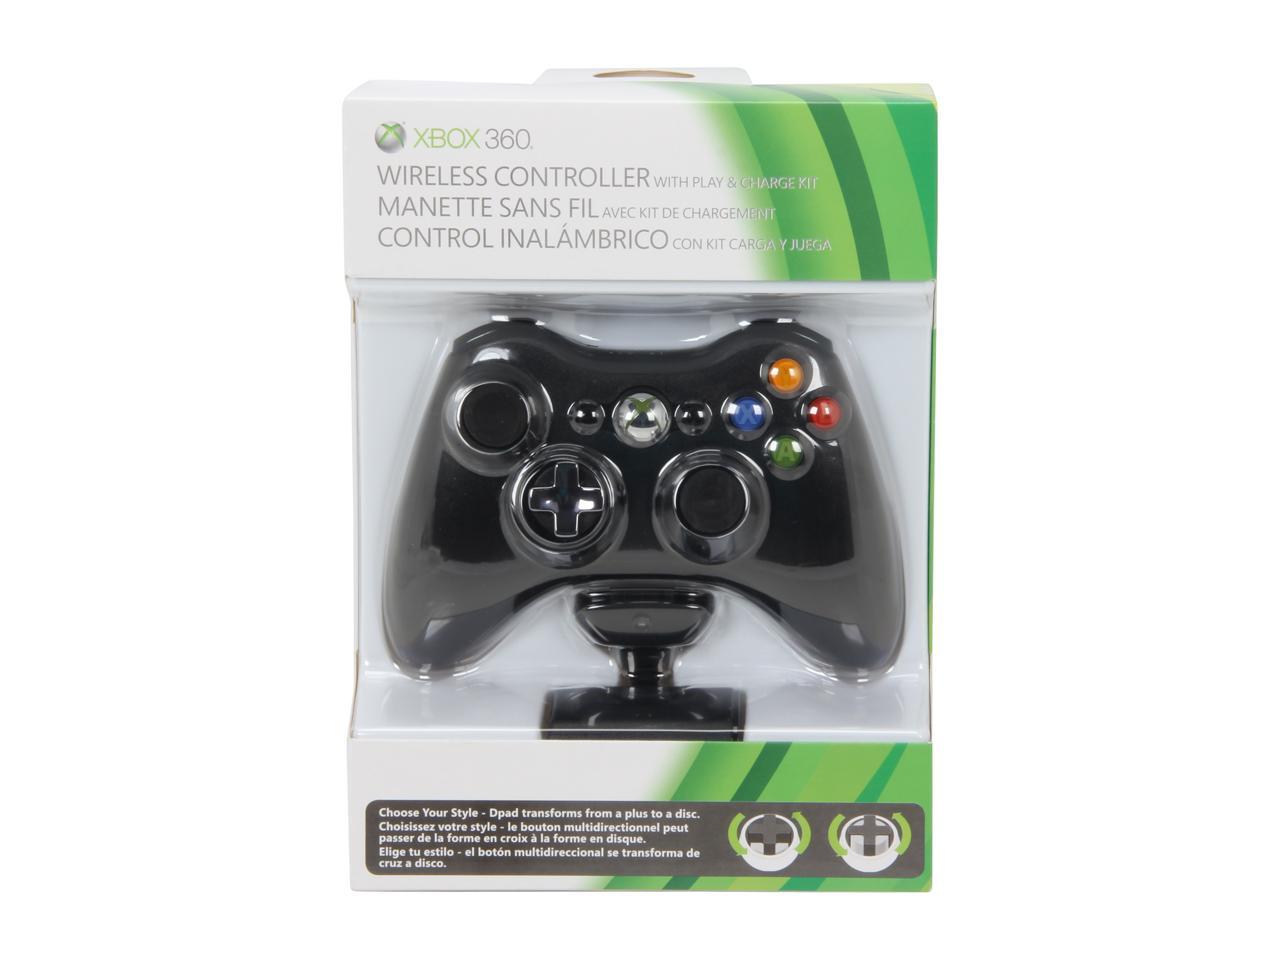 Xbox 360 Wireless Controller with Play & Charge Kit Black - Newegg.com